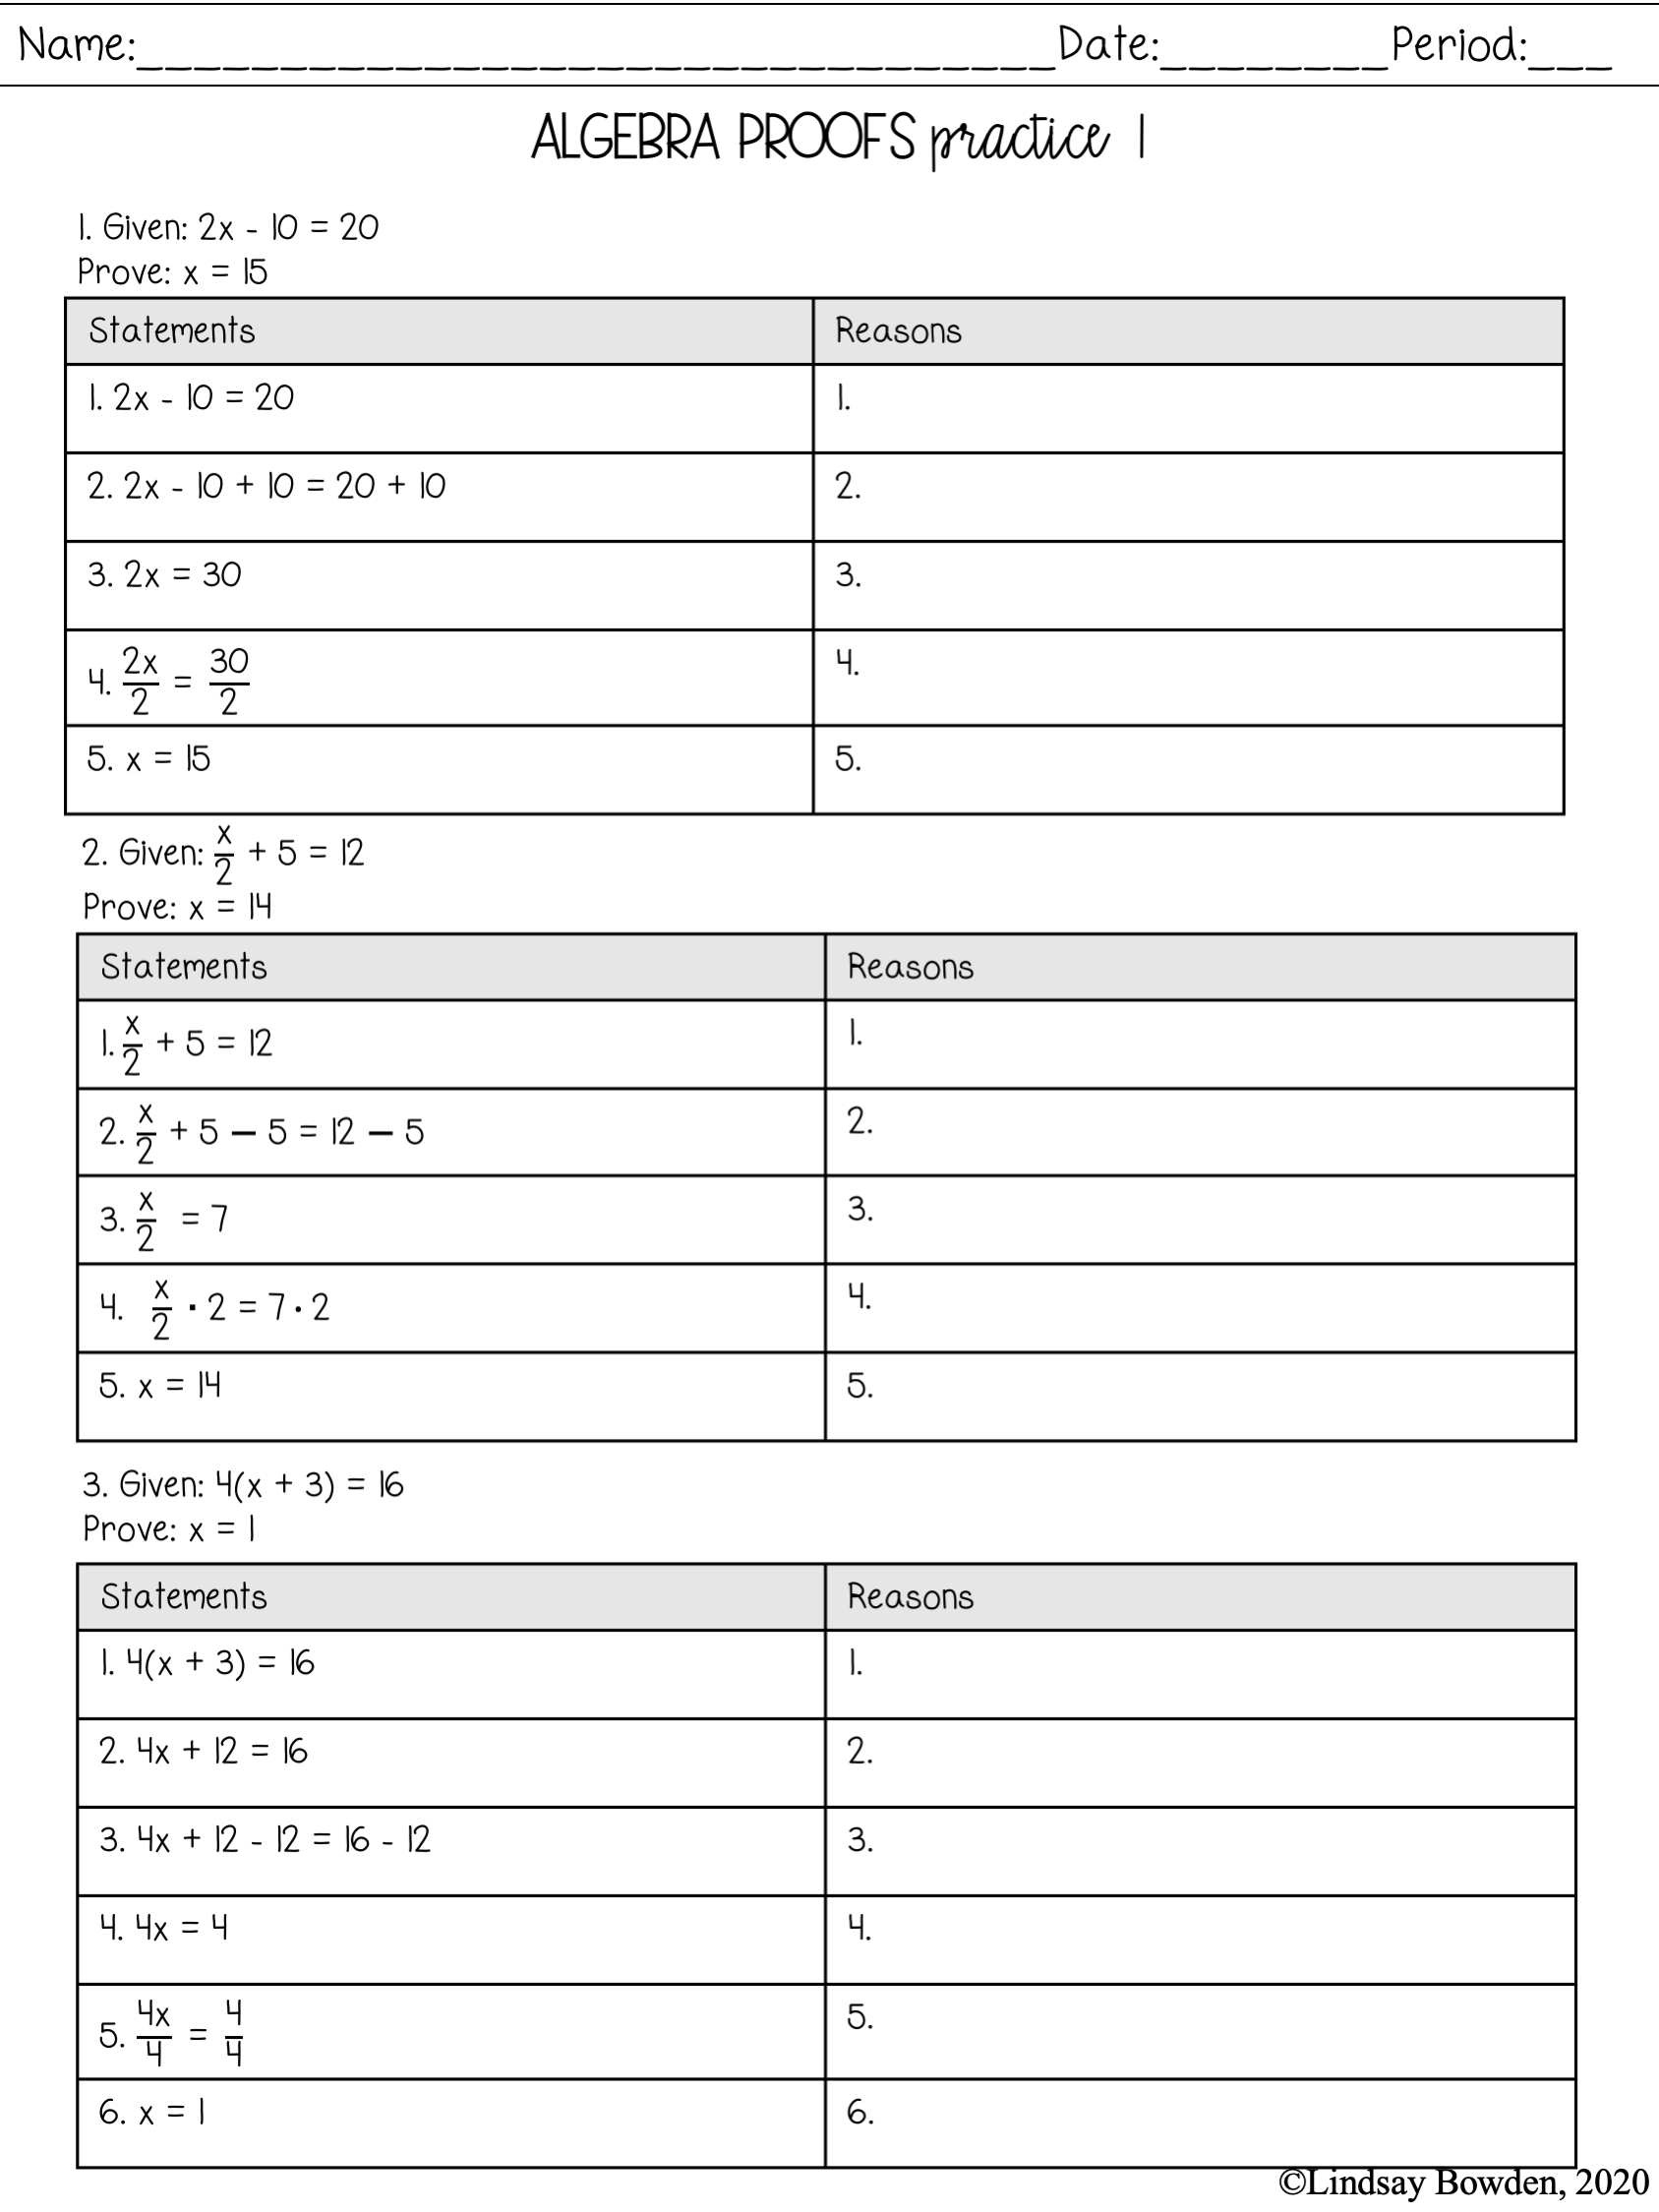 Algebra Proofs Notes and Worksheets - Lindsay Bowden With Regard To Algebraic Proofs Worksheet With Answers